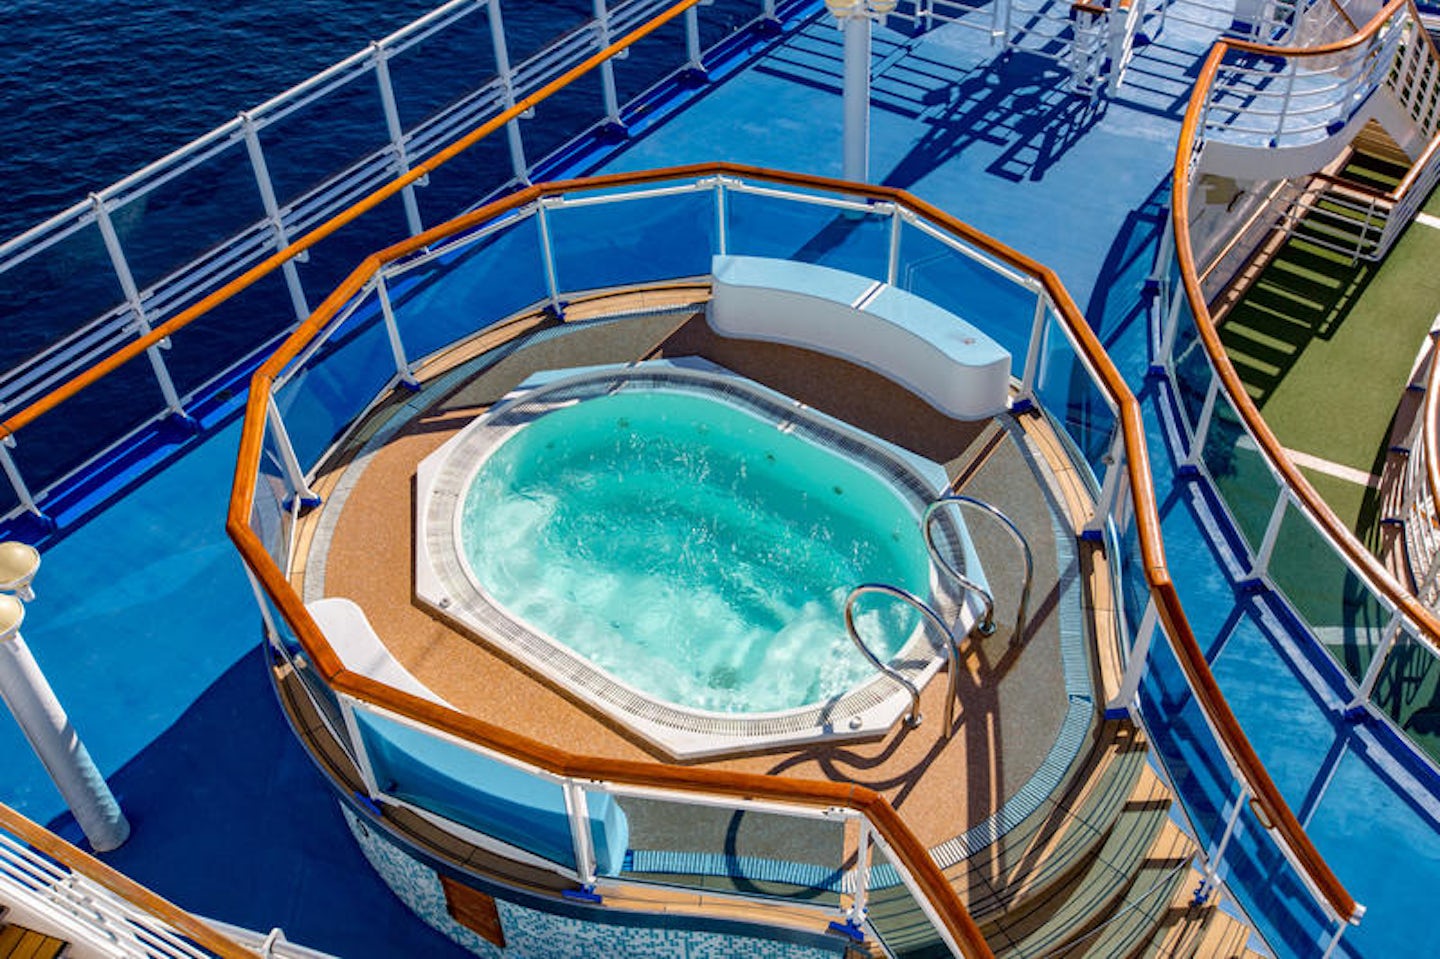 Chill Out Deck on Ruby Princess